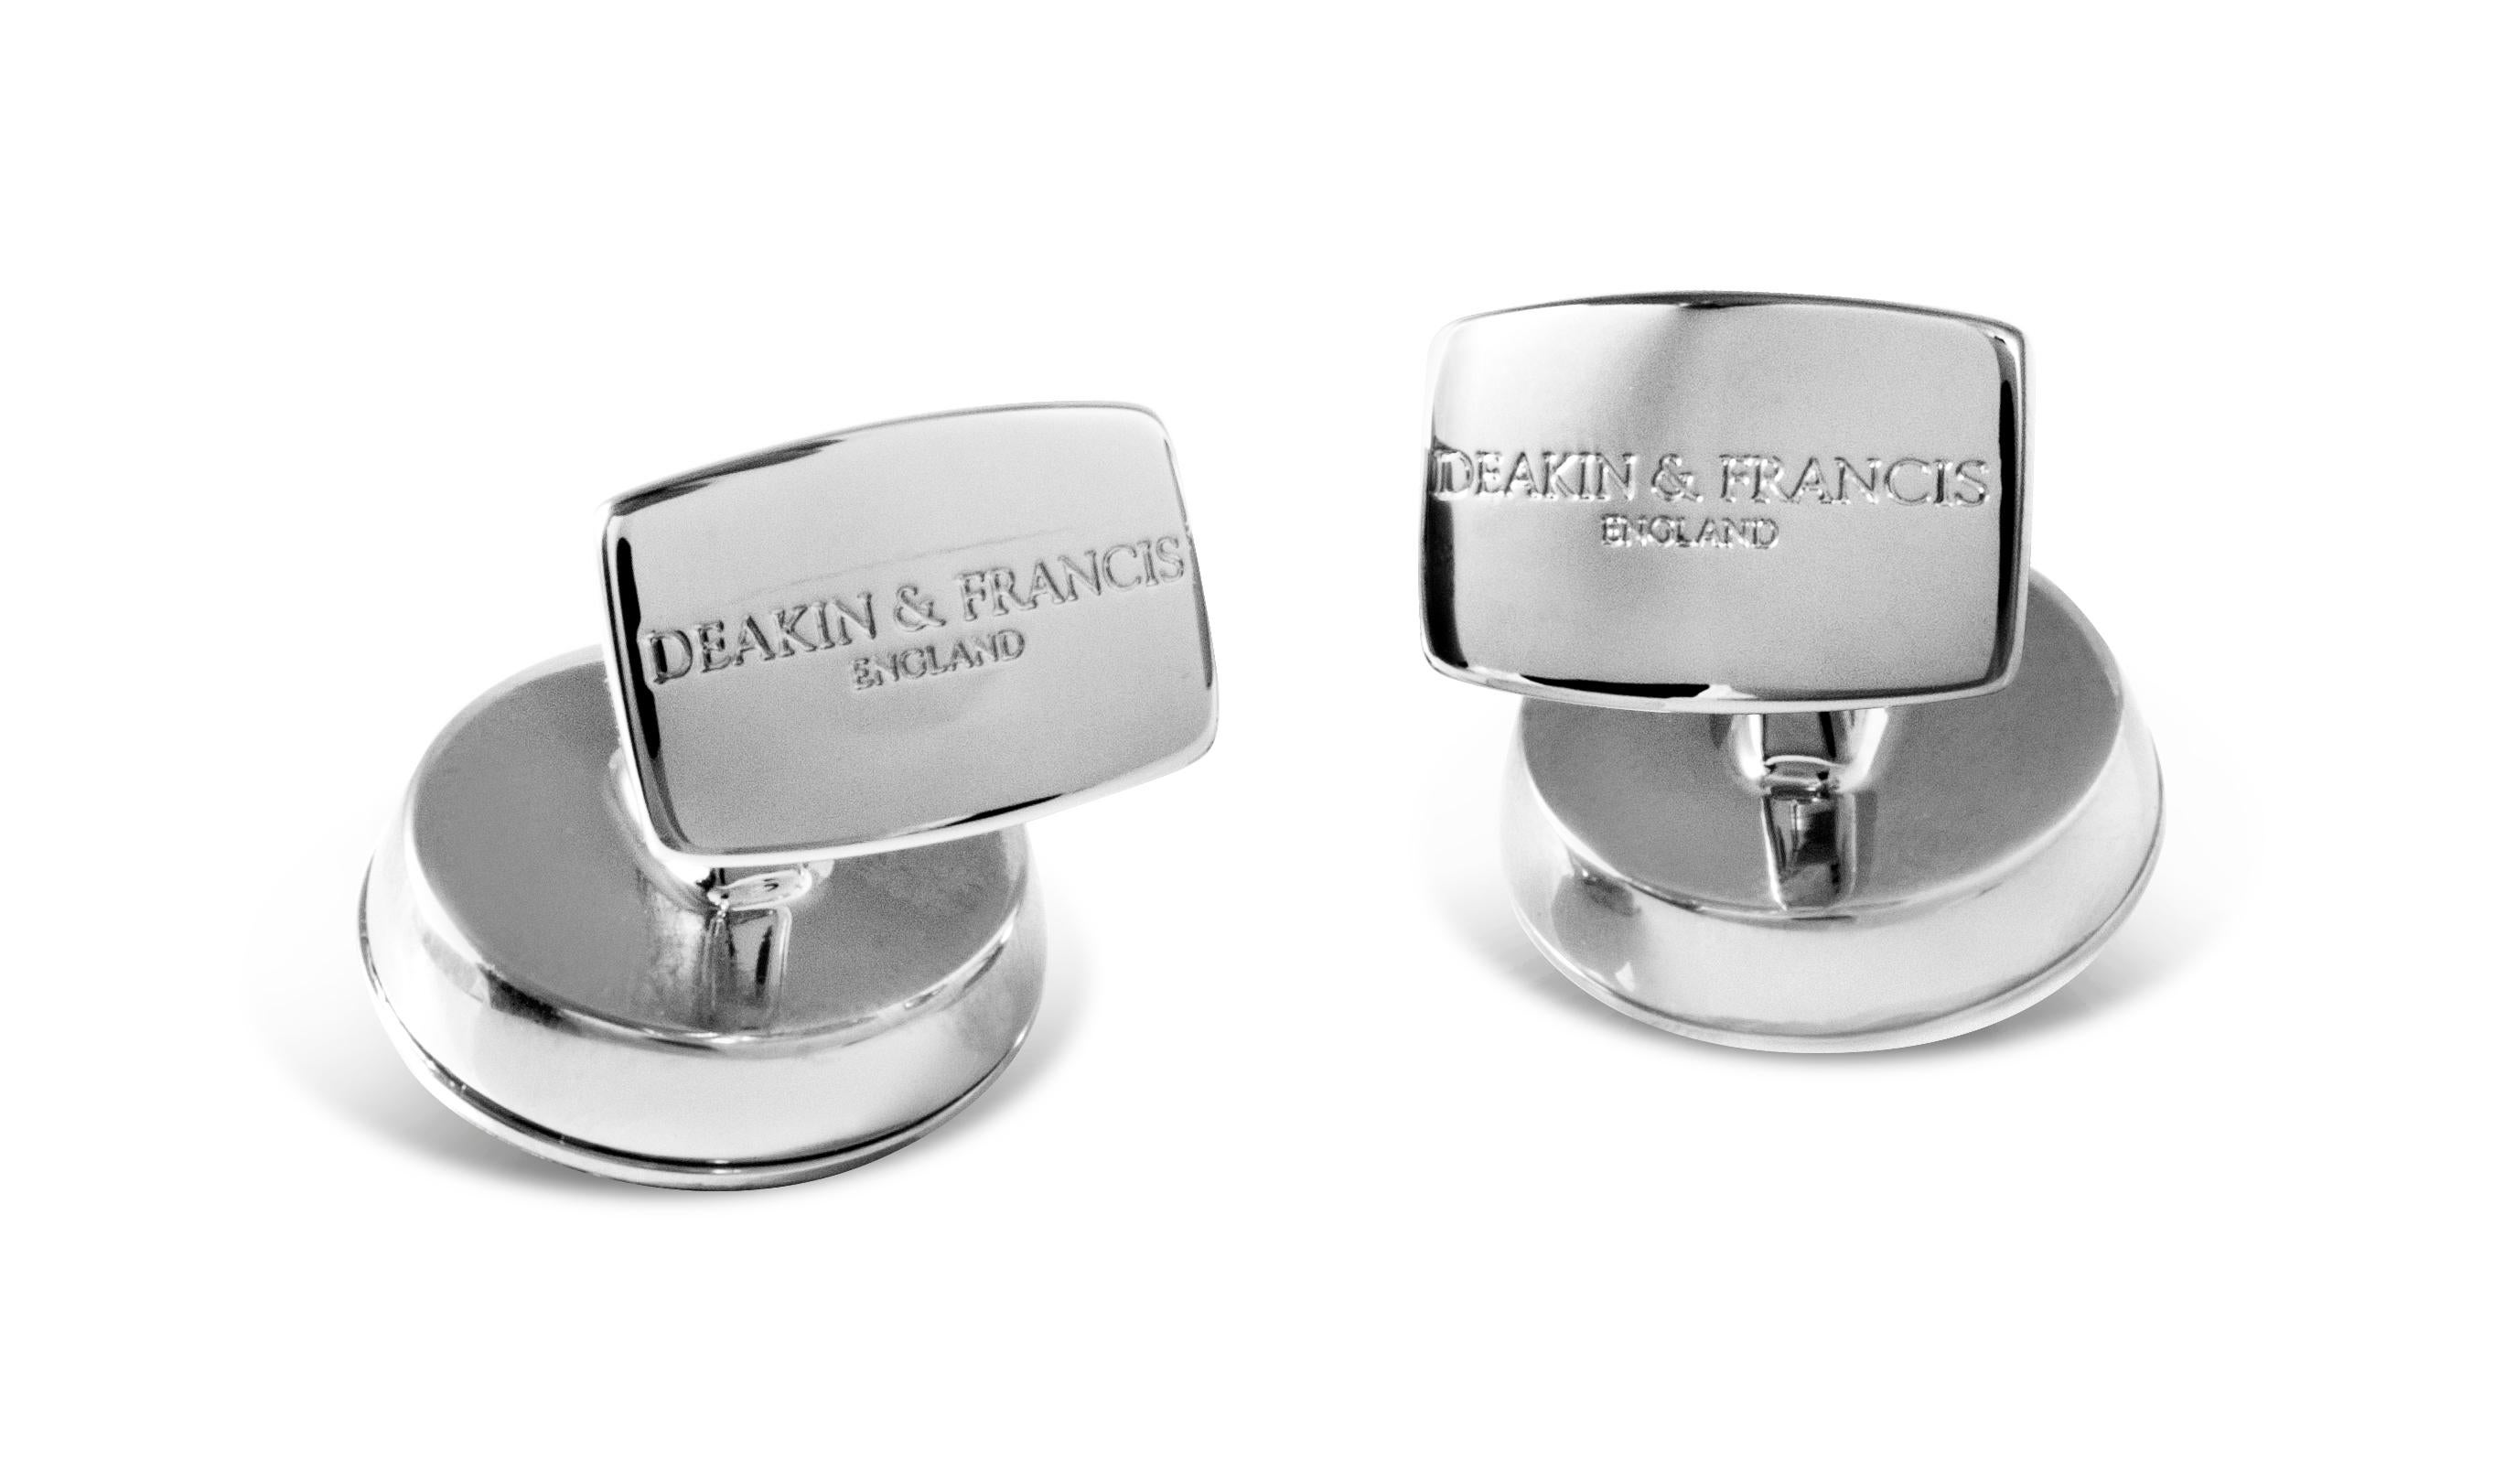 DEAKIN & FRANCIS, Piccadilly Arcade, London

Do you feel the need for speed? All true turbo fans will adore these JET Turbine Engine cufflinks! Imagine the engine roaring as it sucks in air and the blades come to life. With a realistic nose cone,